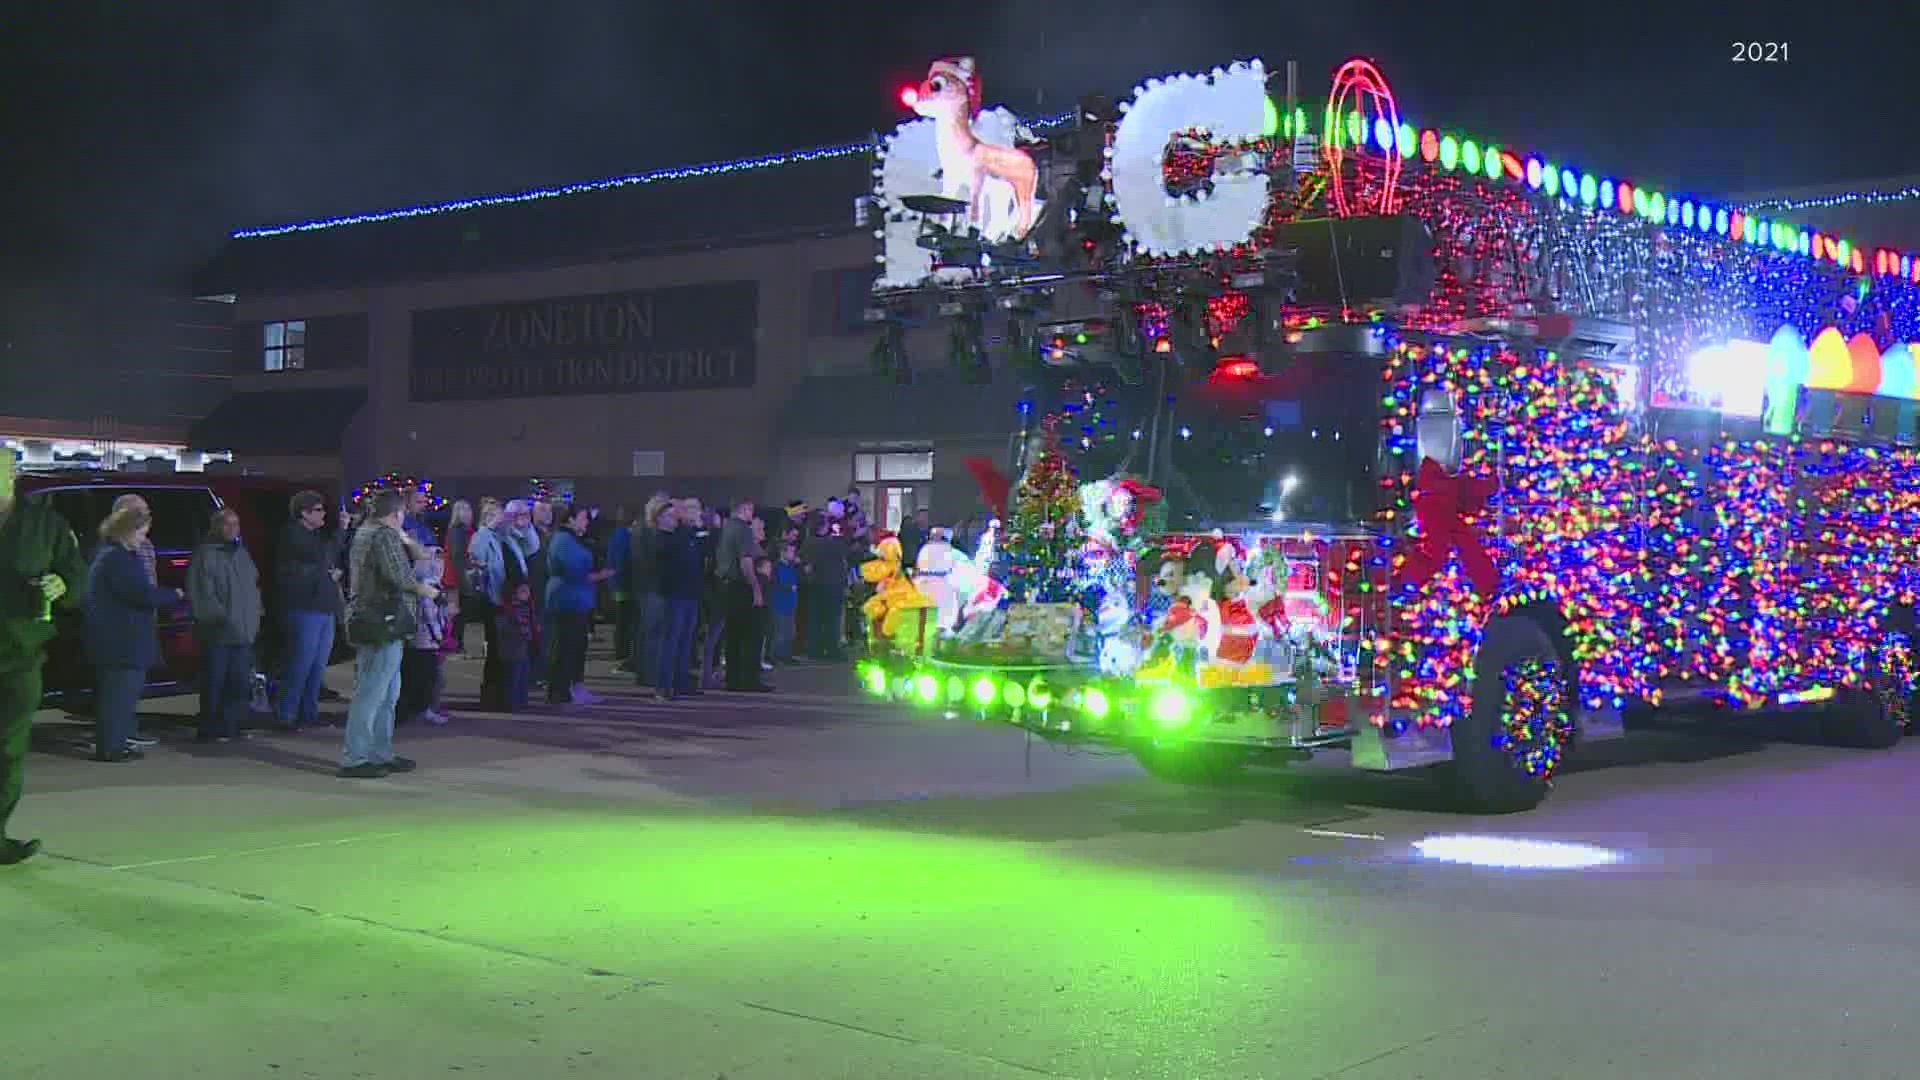 It took two weeks and 80,000 lights to transform this ladder truck into Santa's sleigh.